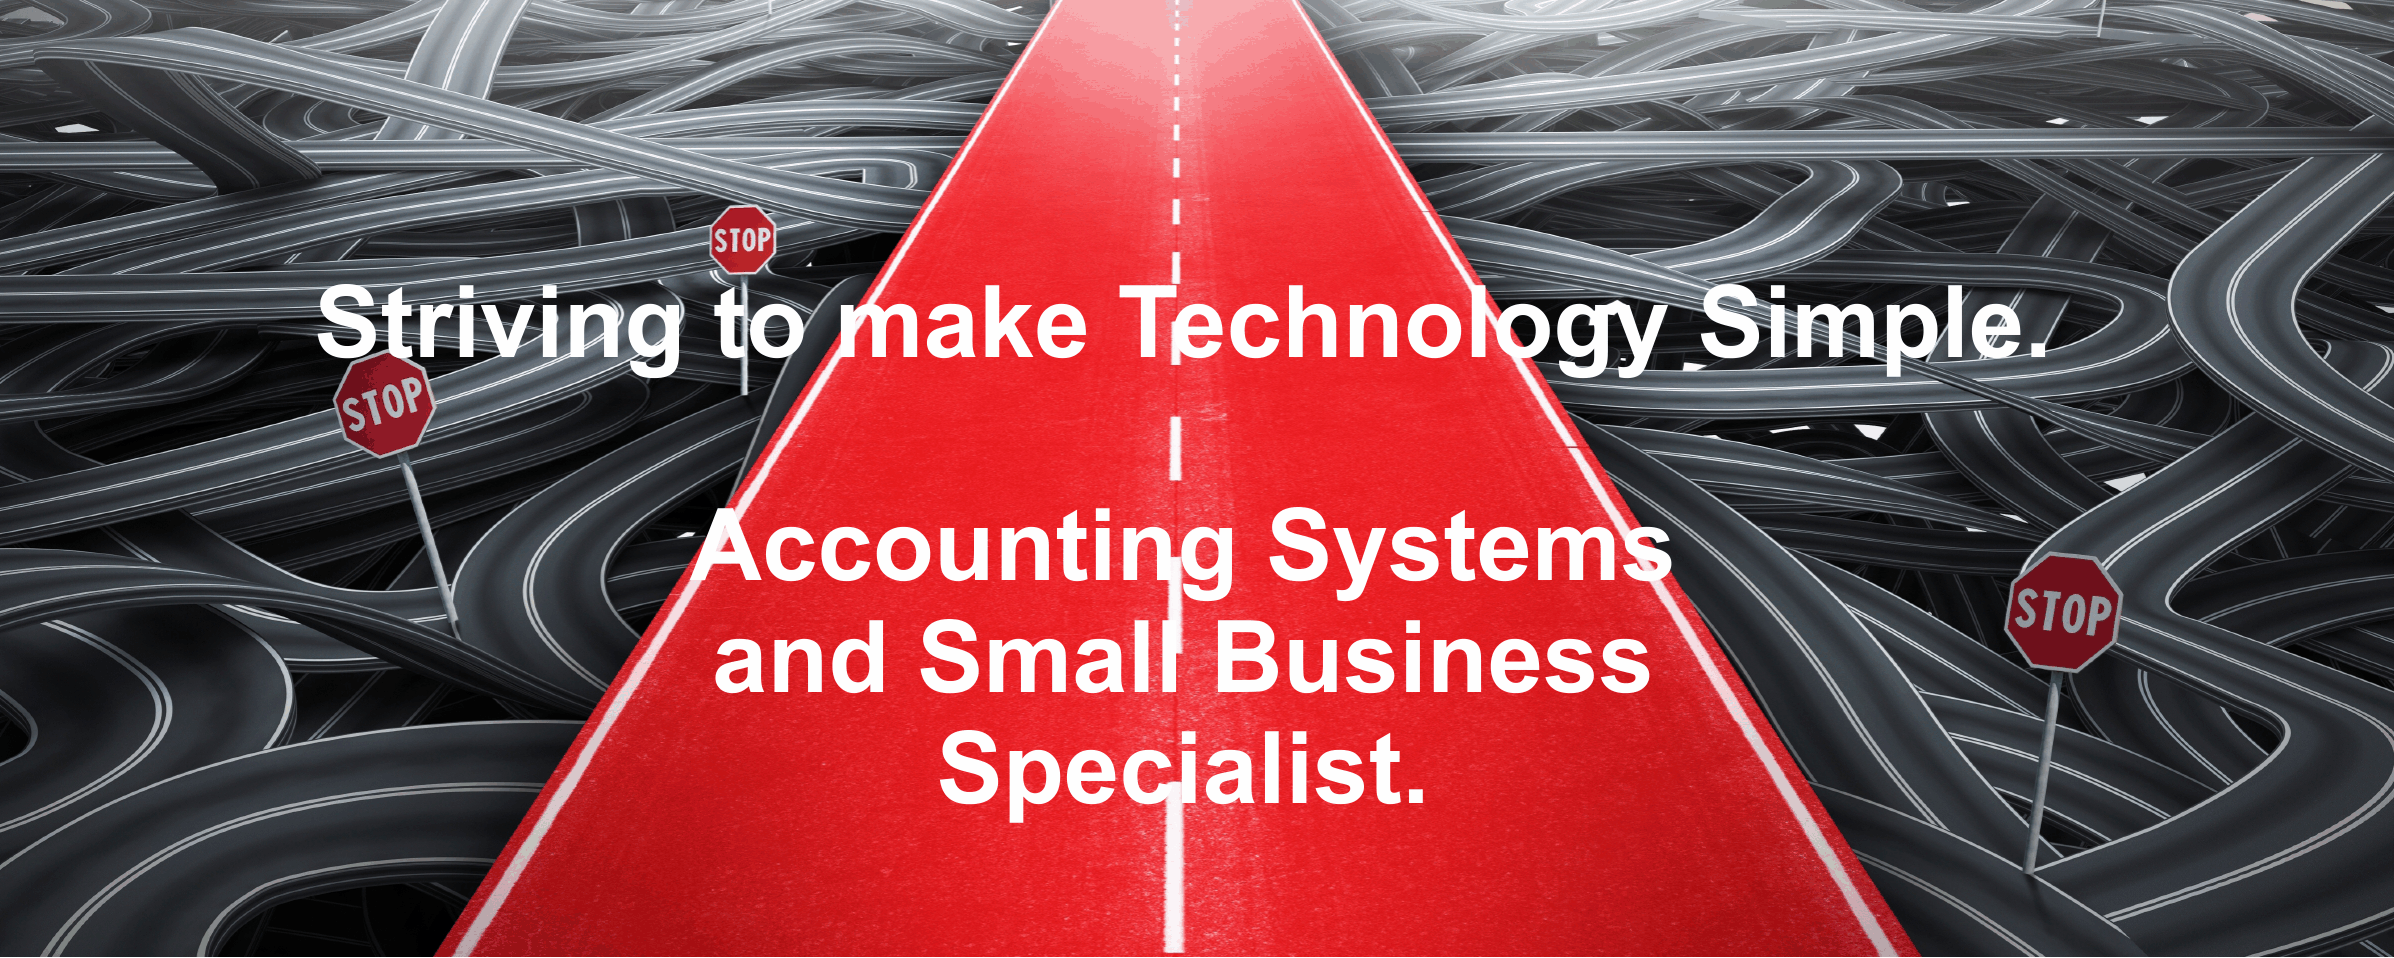 Accounting Systems and Small Business Specialist